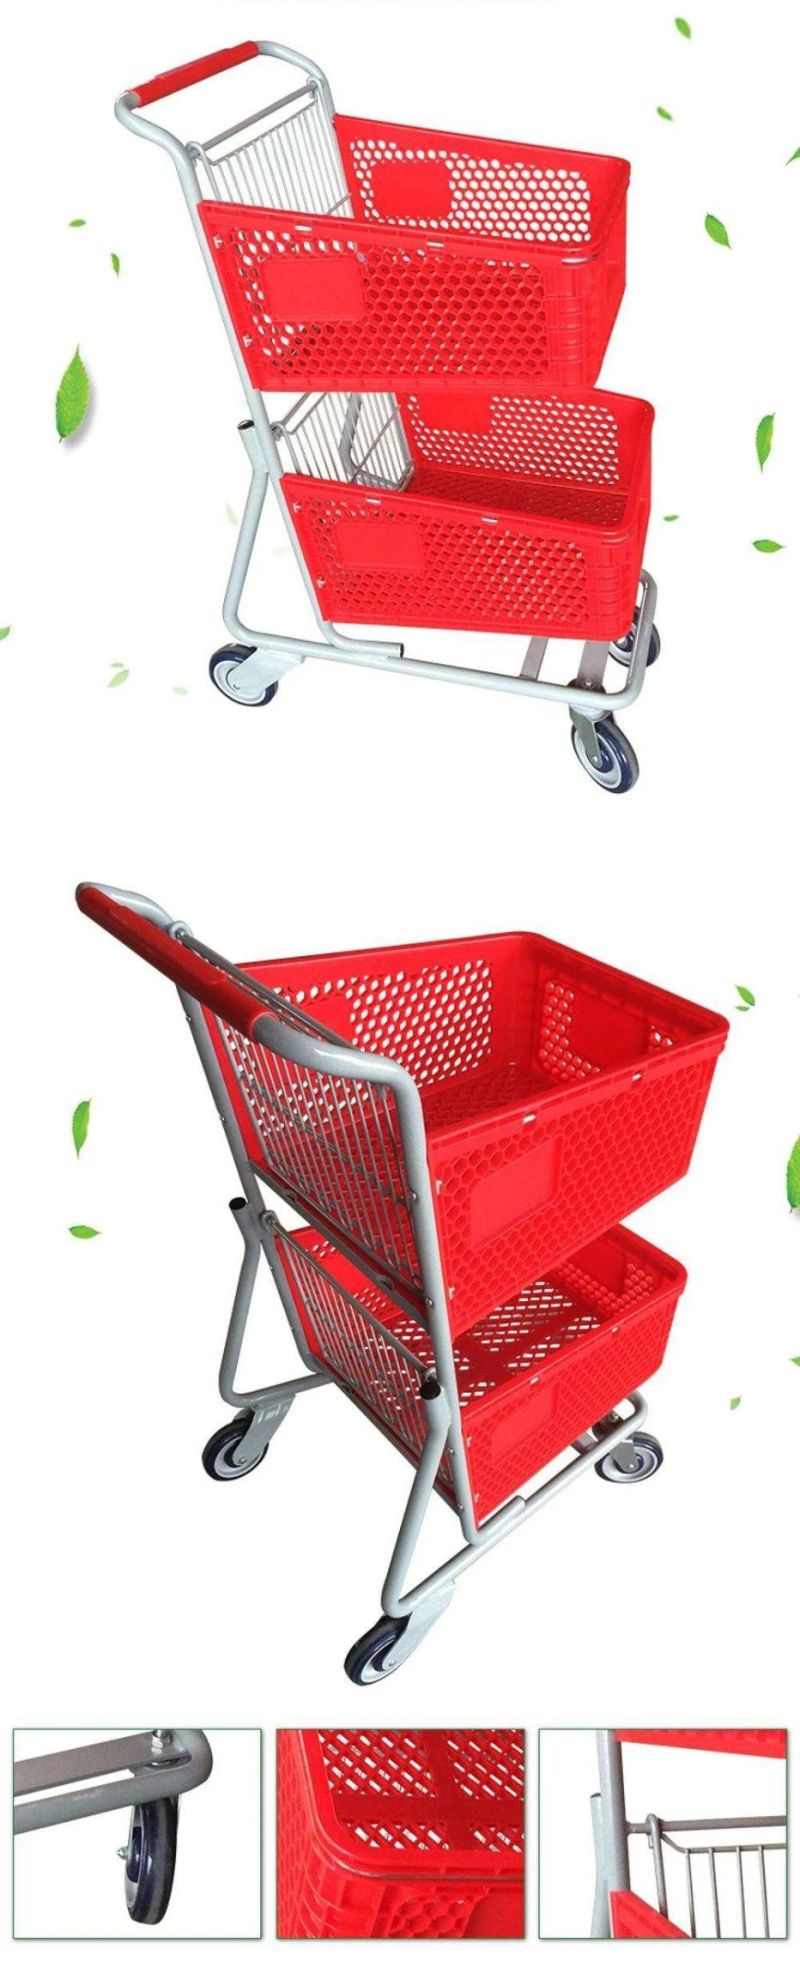 Supermarket Double Basket Carrying Shopping Trolley